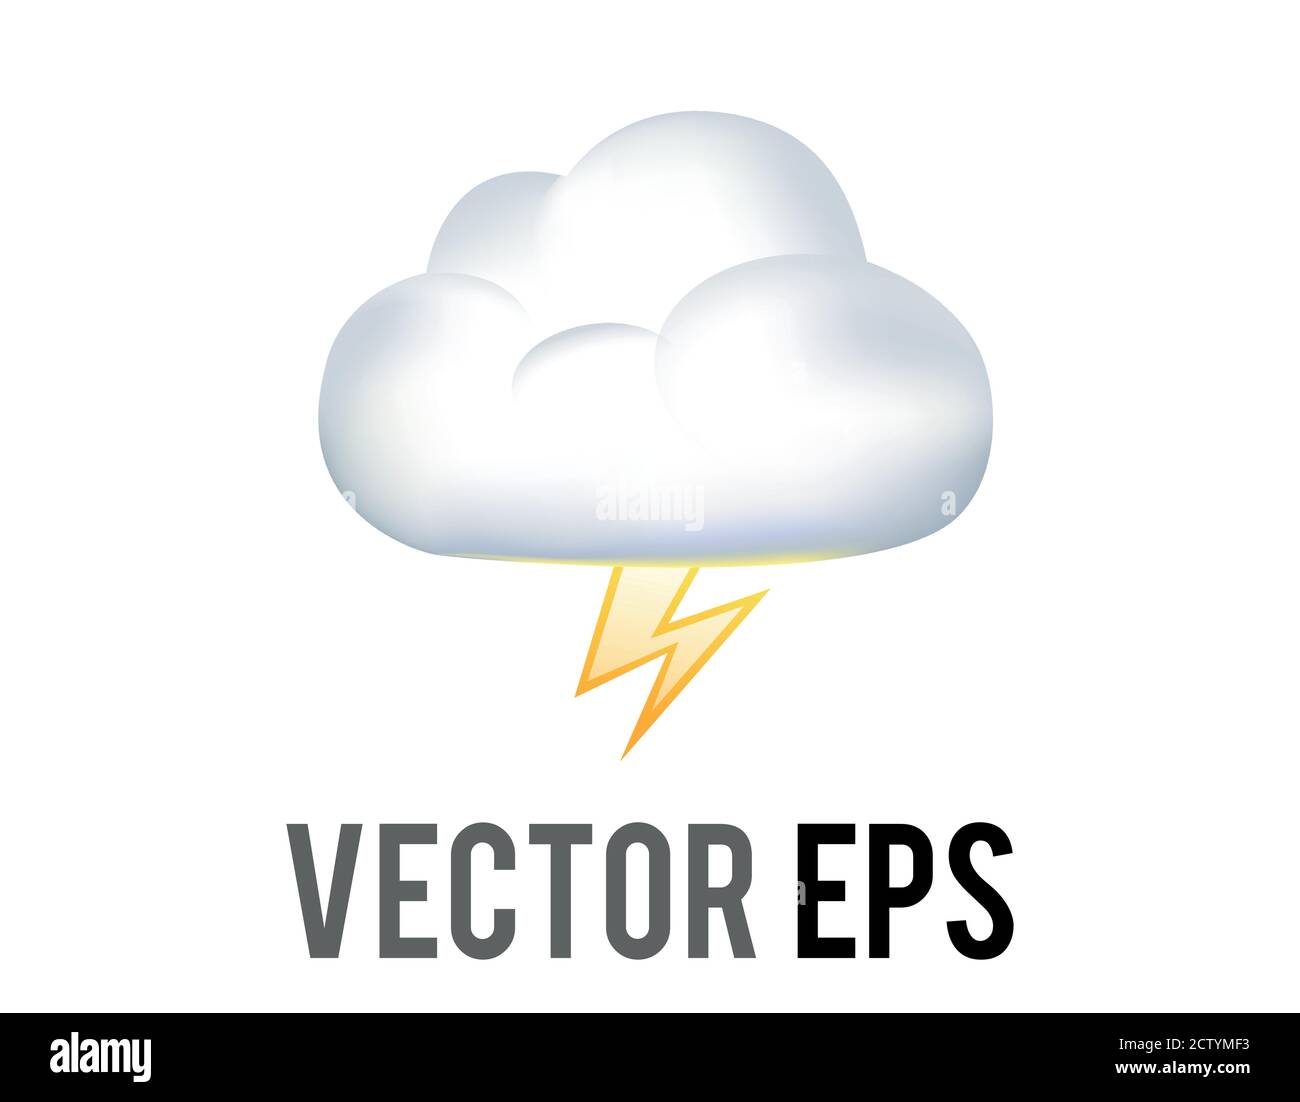 The isolated vector white thunderstorms cloud icon with yellow lightning bolt flashing from thundercloud Stock Vector